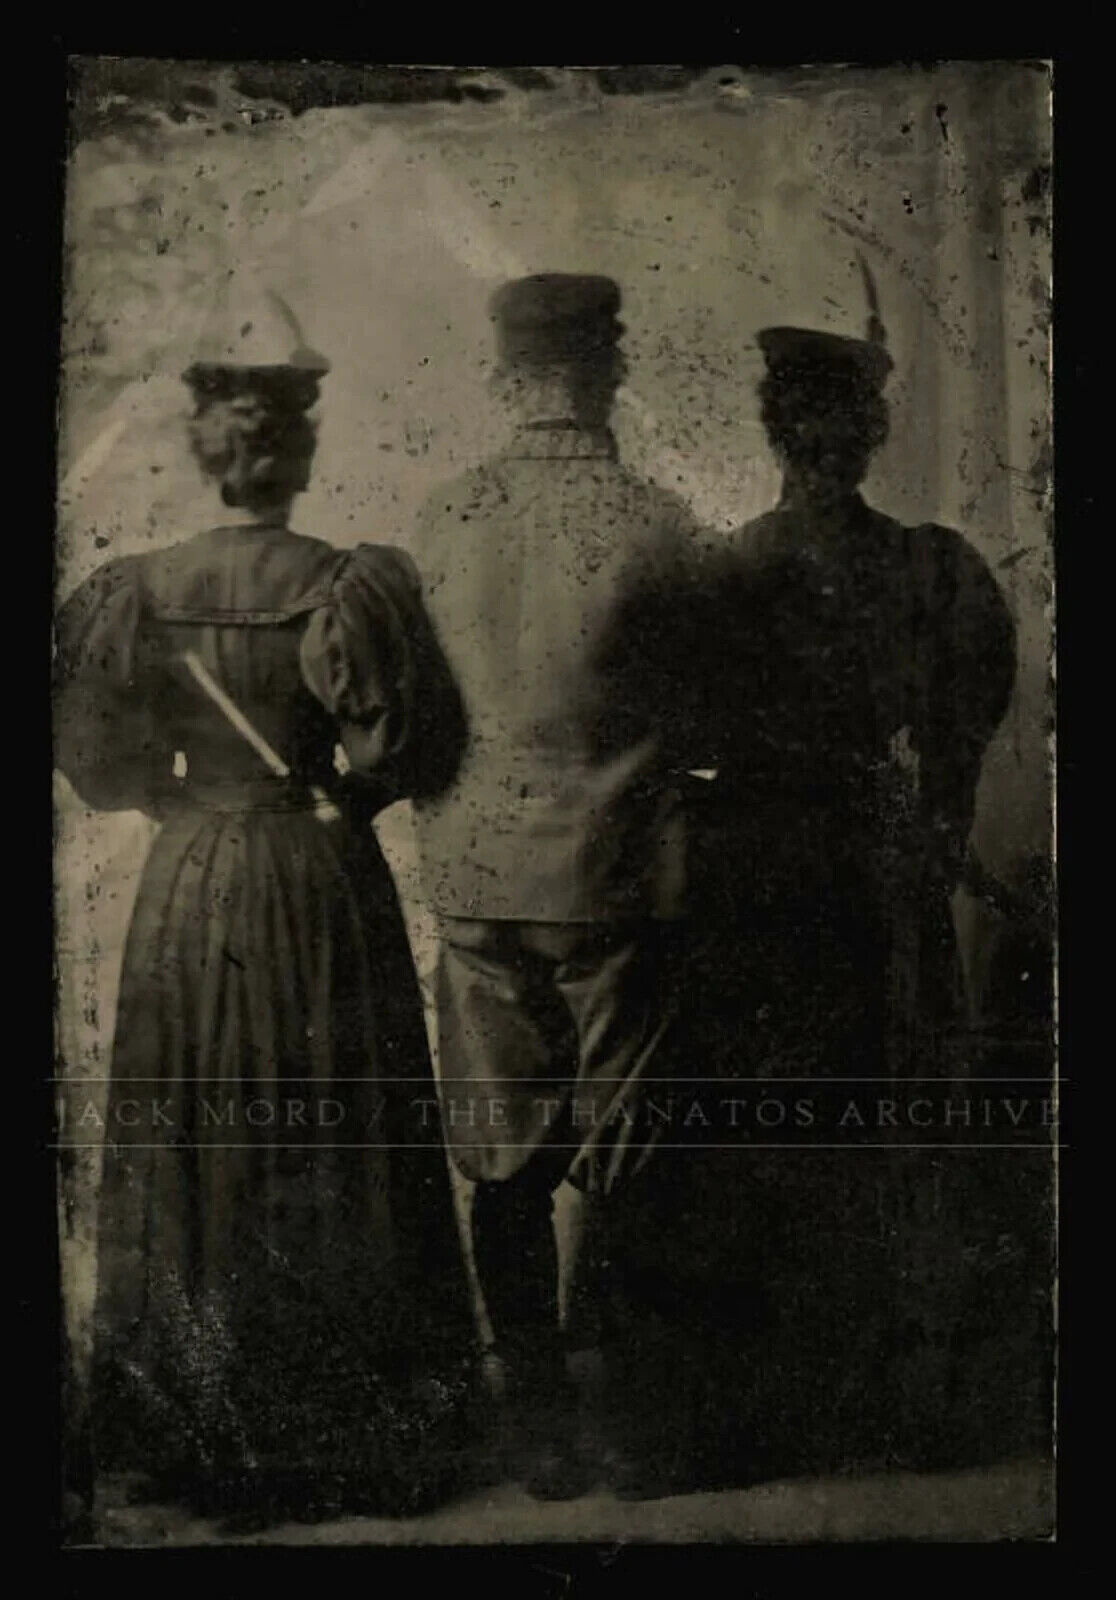 Rare Rear View, Creepy Unusual Tintype Photo Group with Backs Turned to the Came